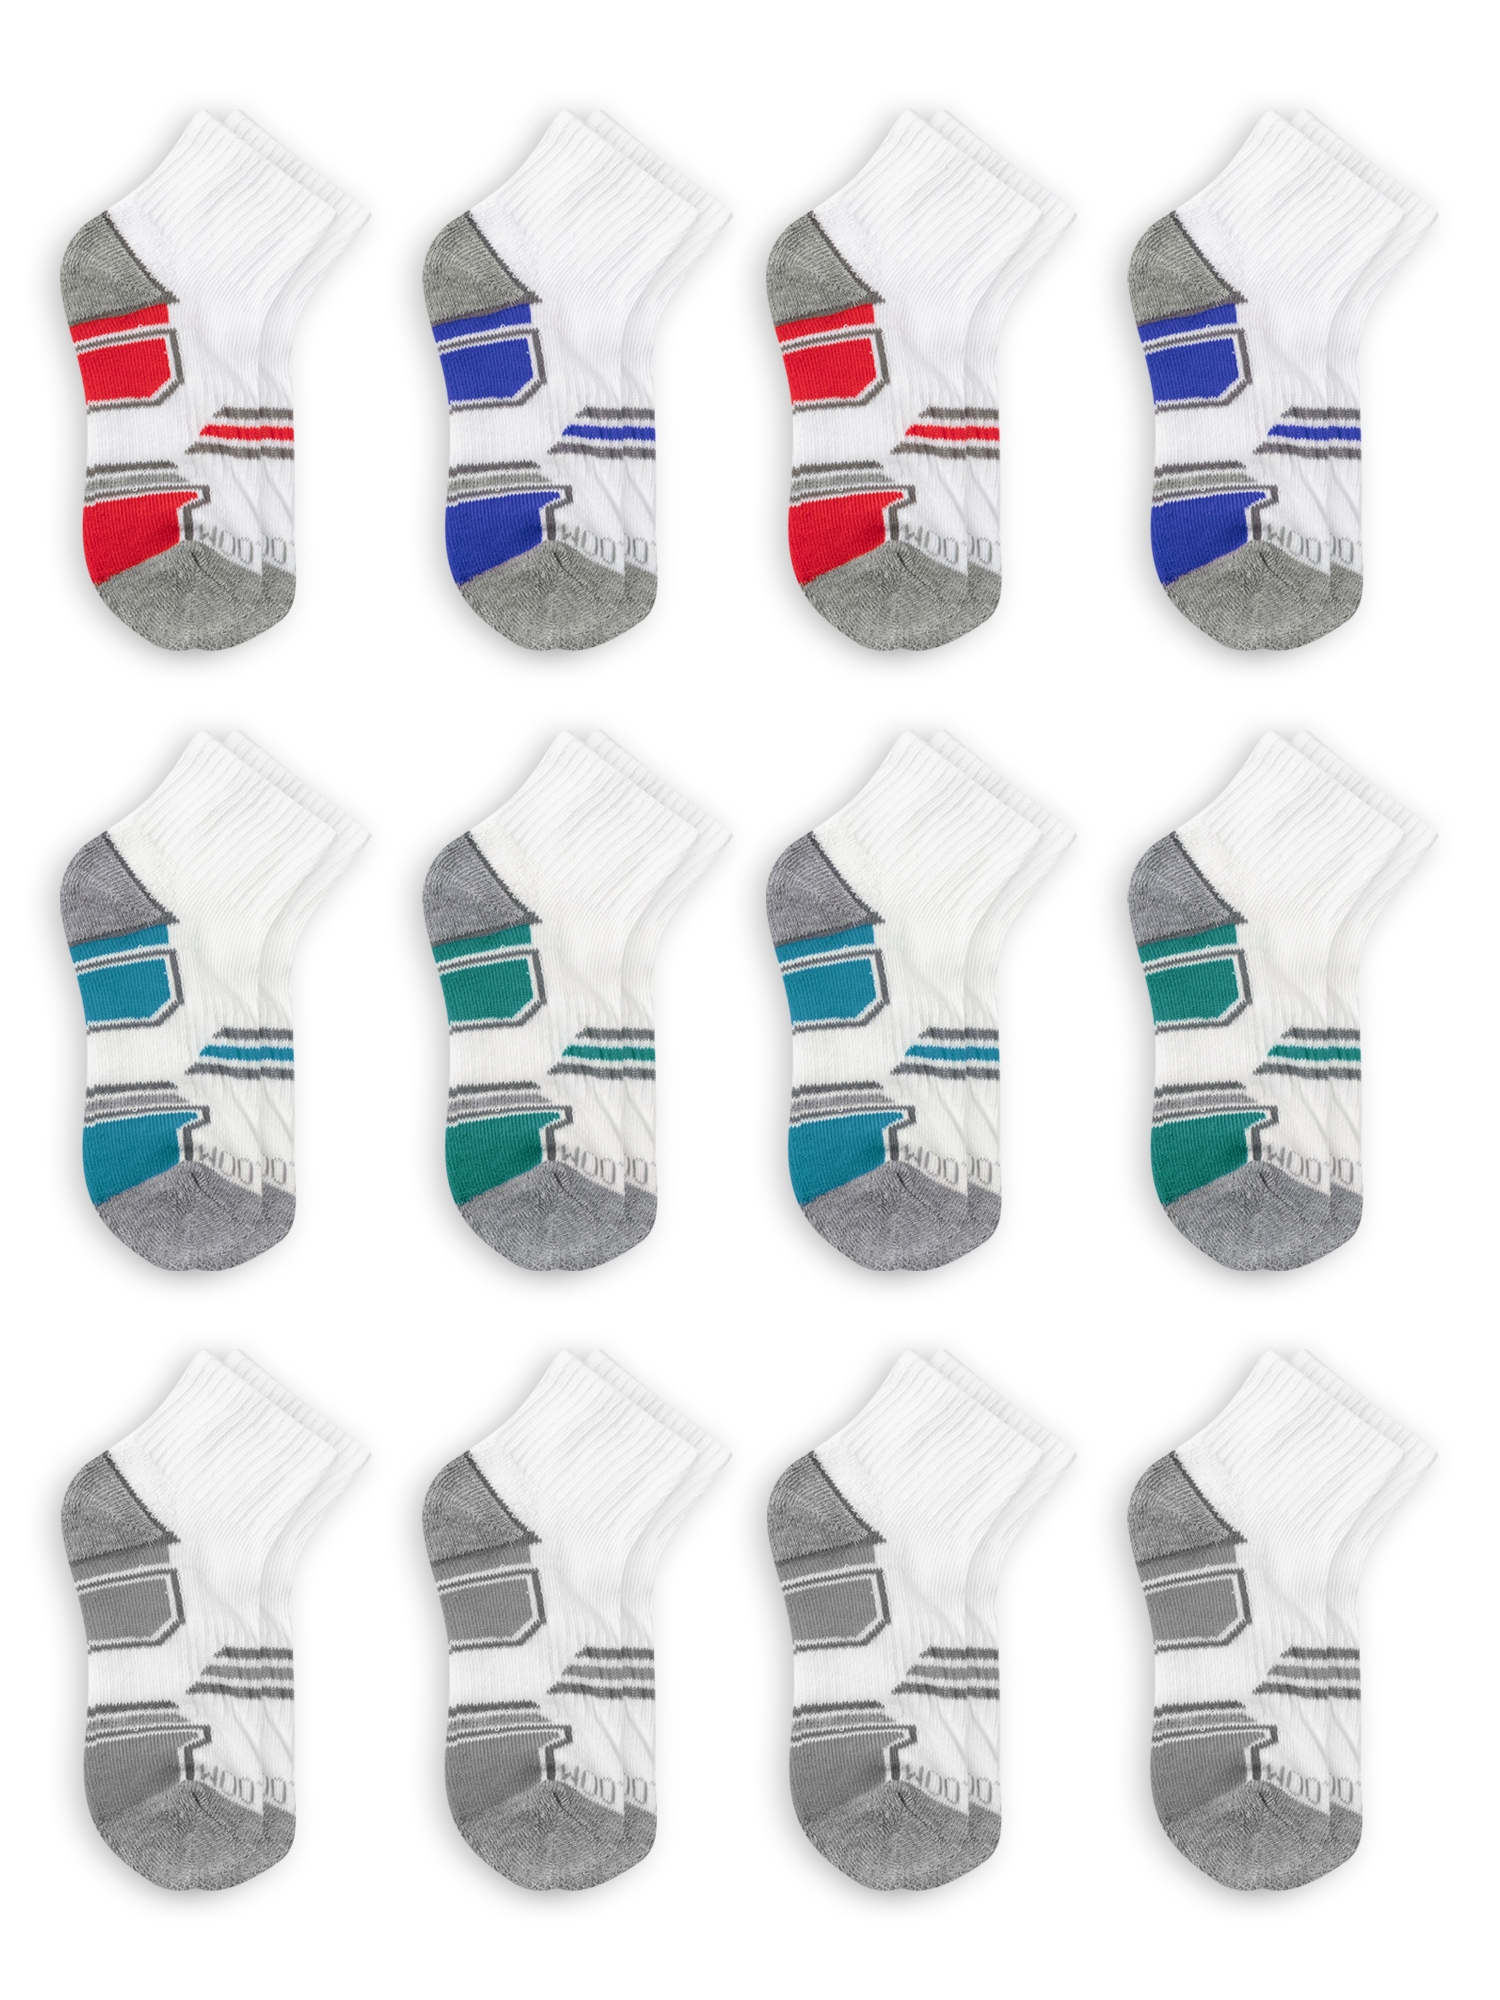 Fruit of the Loom Boys Active Ankle Socks, 12 Pack - image 1 of 5